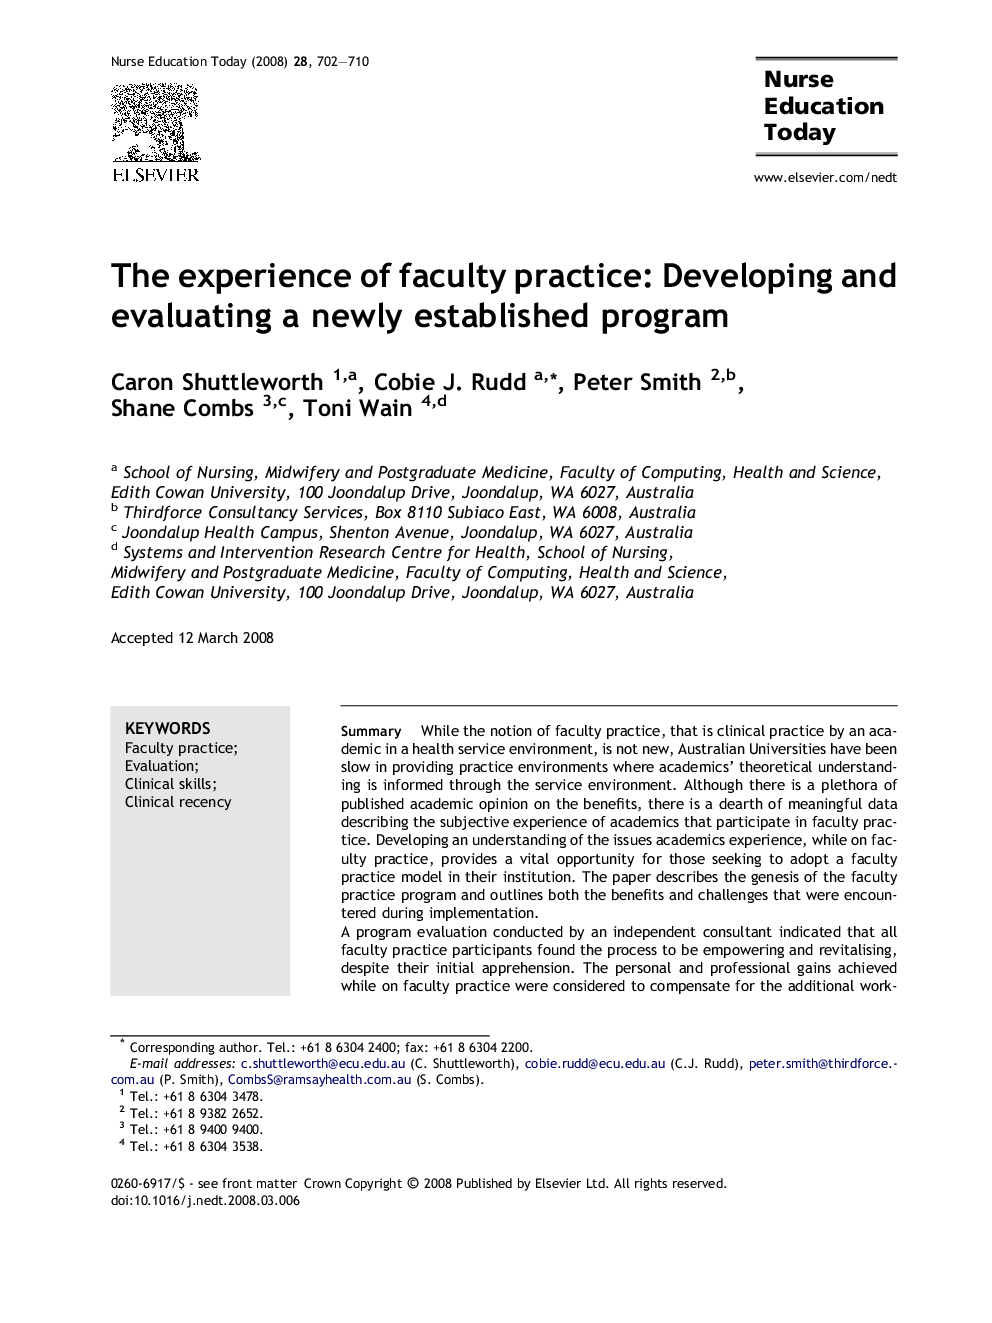 The experience of faculty practice: Developing and evaluating a newly established program